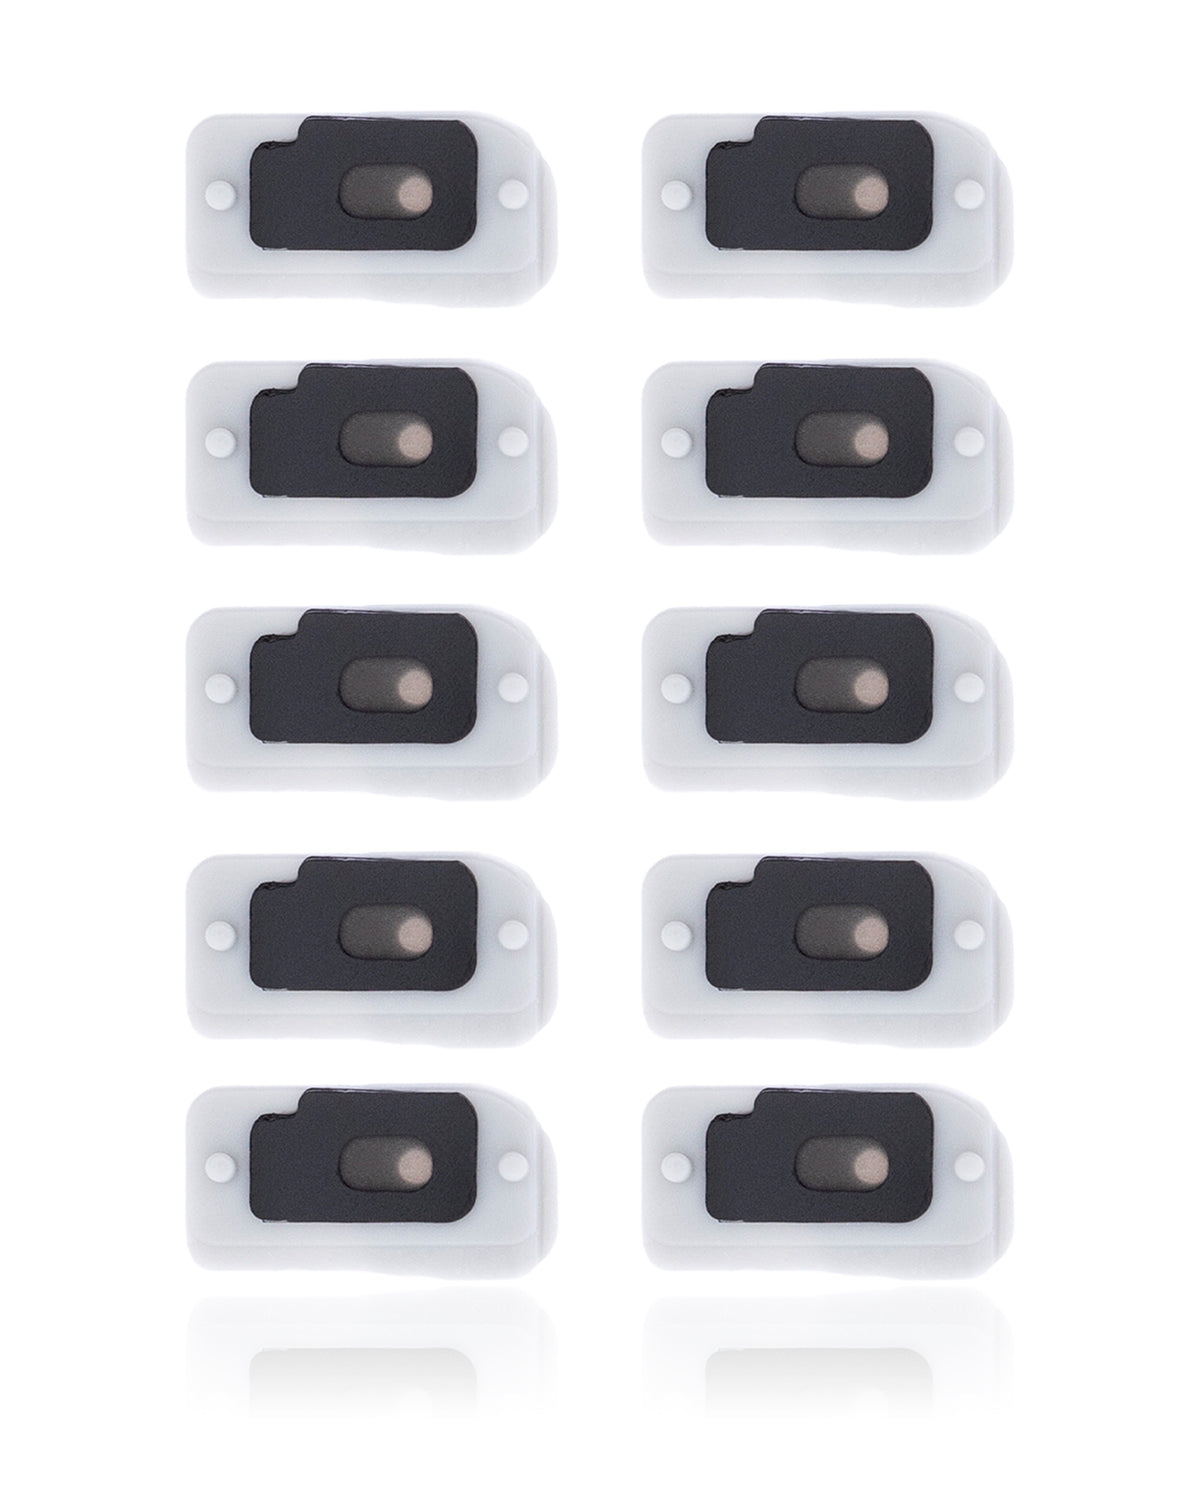 FLASH LIGHT / POWER FLEX BRACKET WITH MICROPHONE MESH FOR IPHONE 12 PRO (10 PACK)